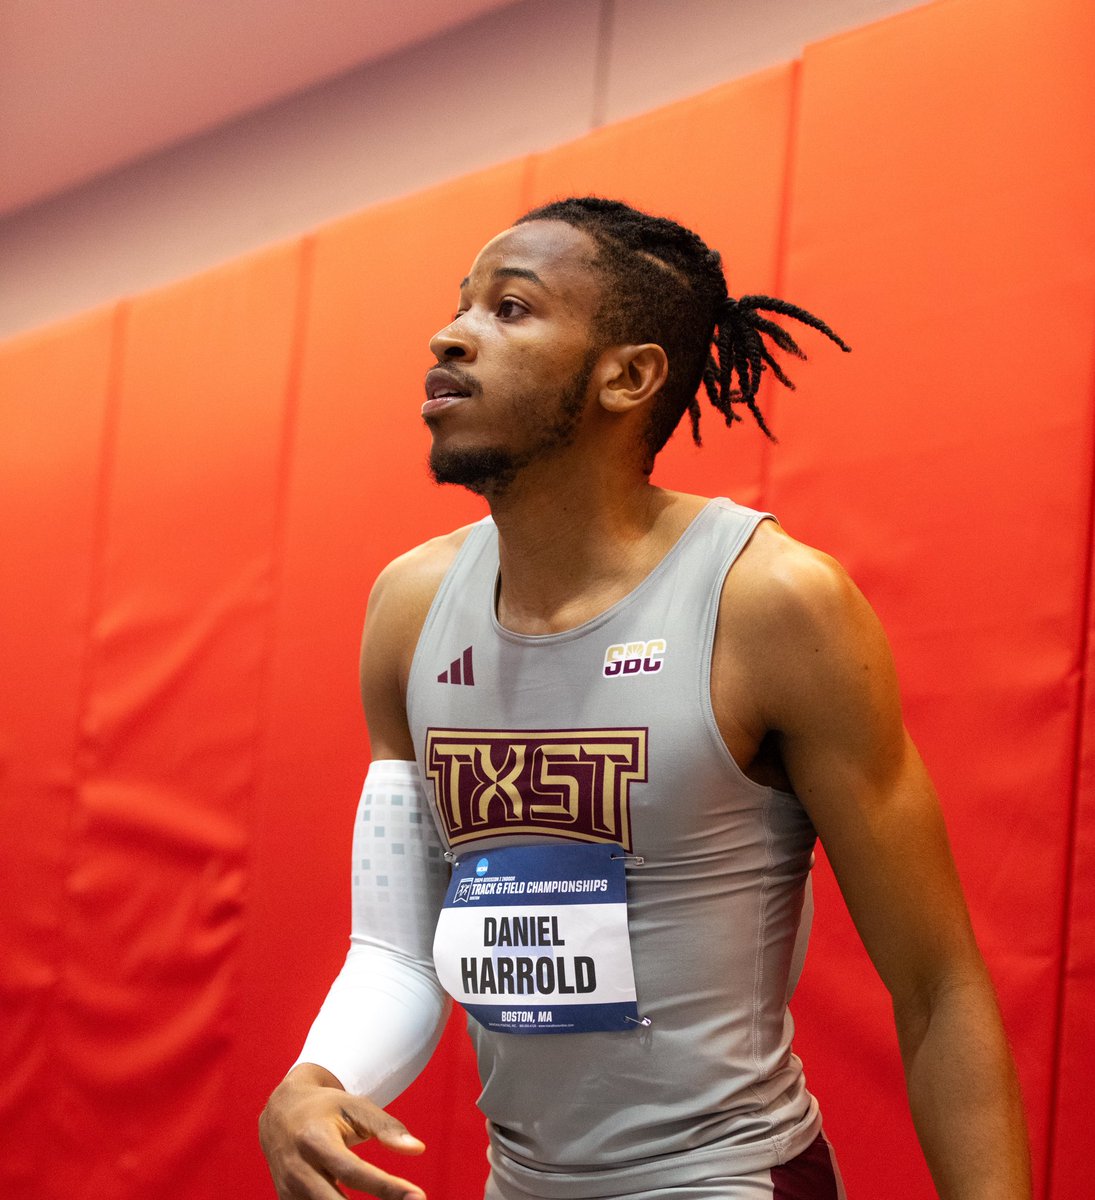 Daniel Harrold goes 7.73 in the prelims of the men’s 60m hurdles and places 10th. - 7th-best time in school history #EatEmUp